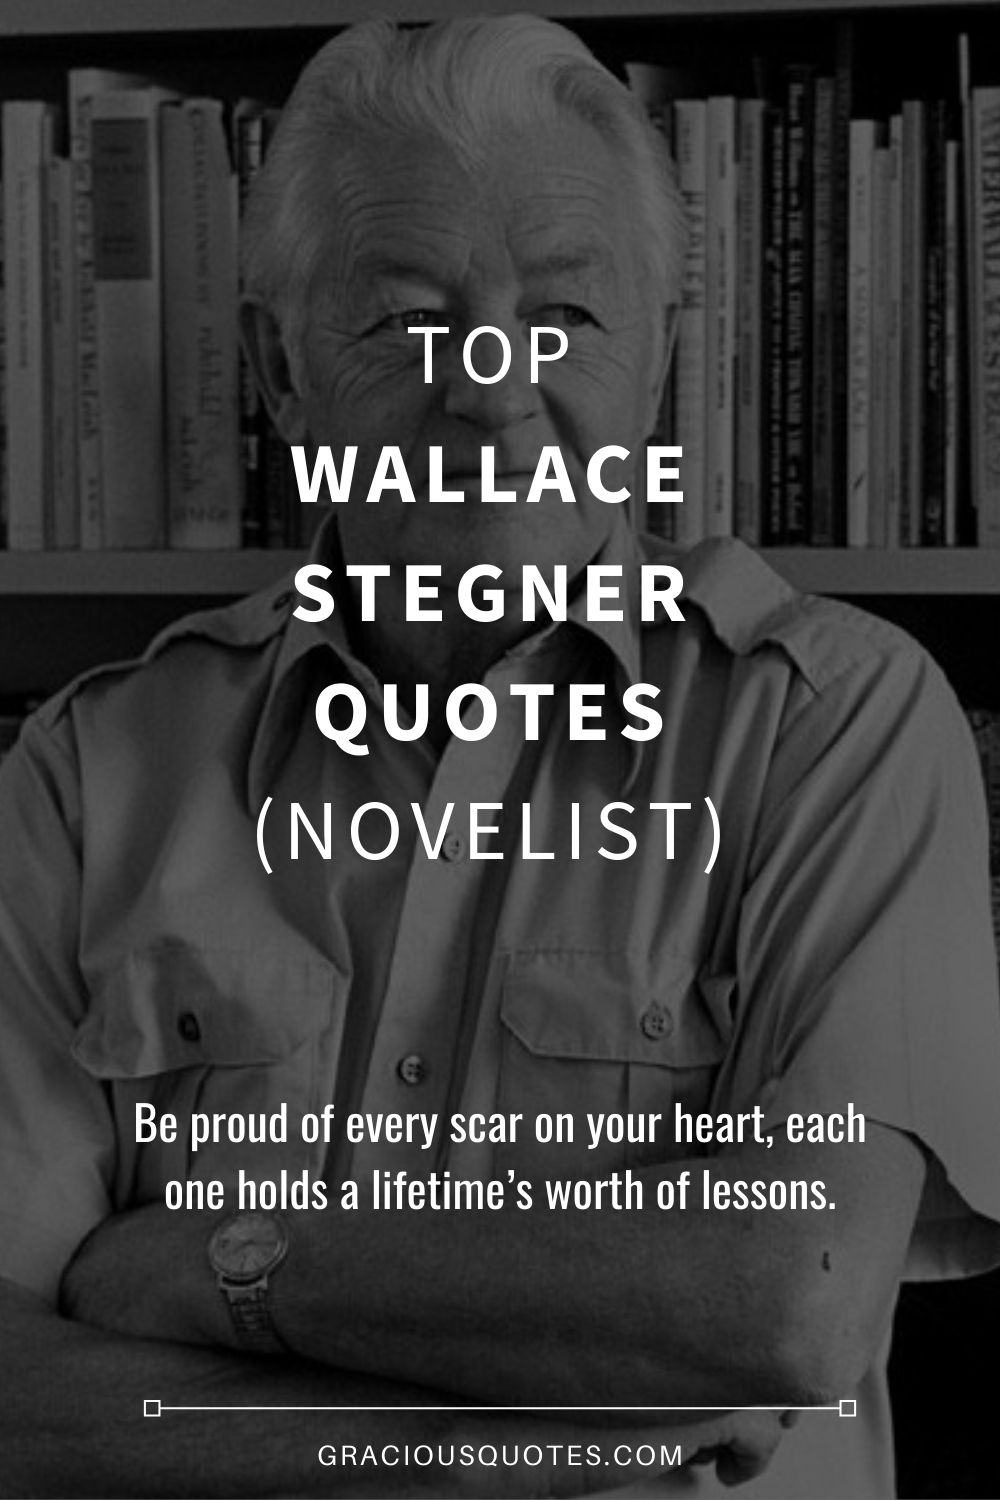 Top Wallace Stegner Quotes (NOVELIST) - Gracious Quotes